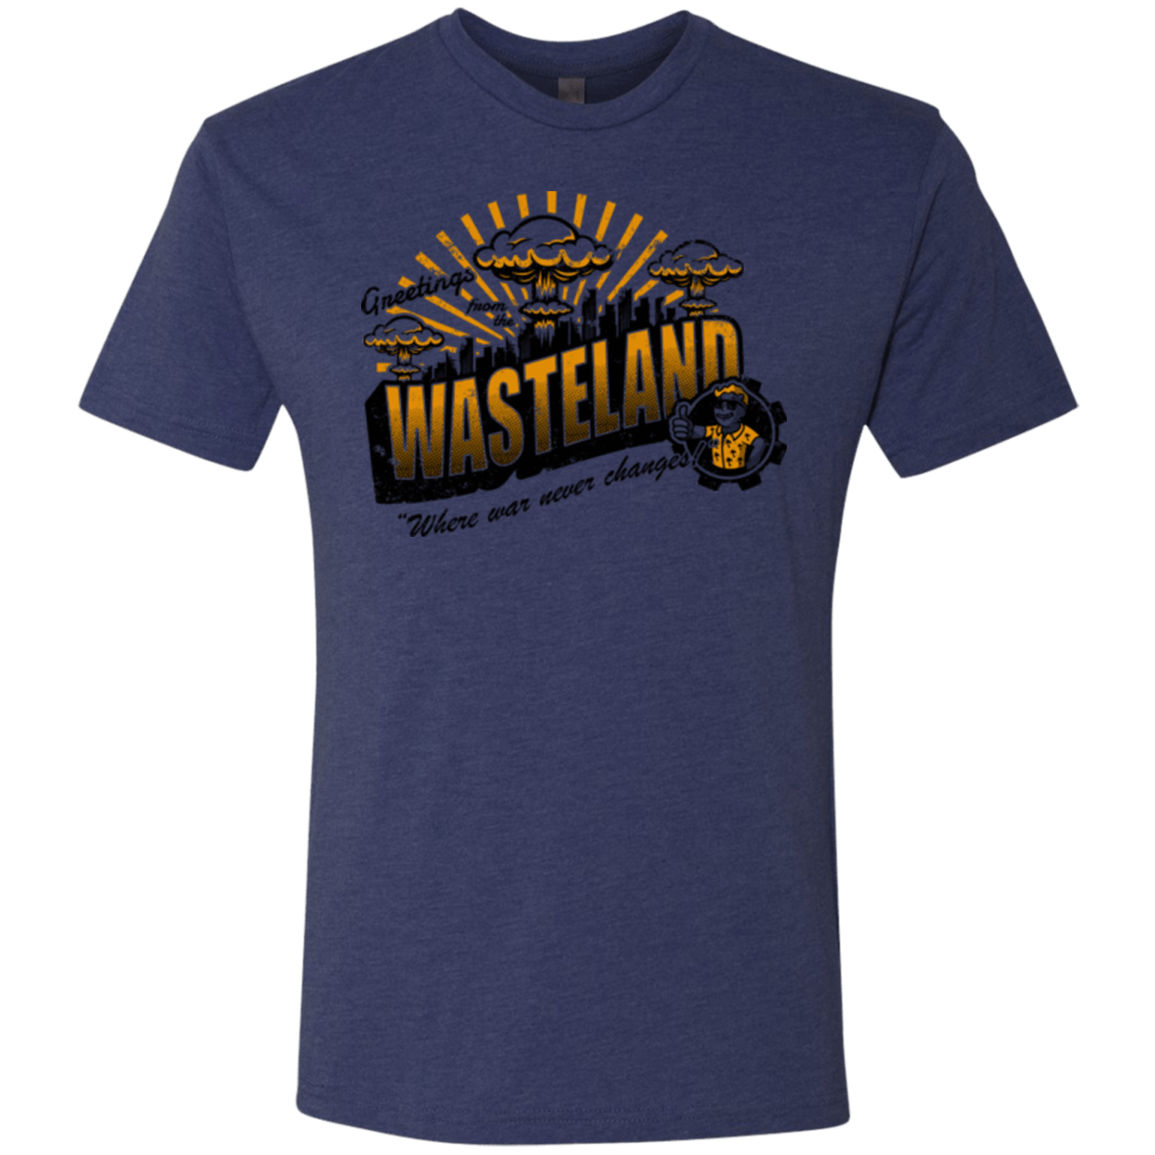 T-Shirts Vintage Navy / Small Greetings from the Wasteland! Men's Triblend T-Shirt